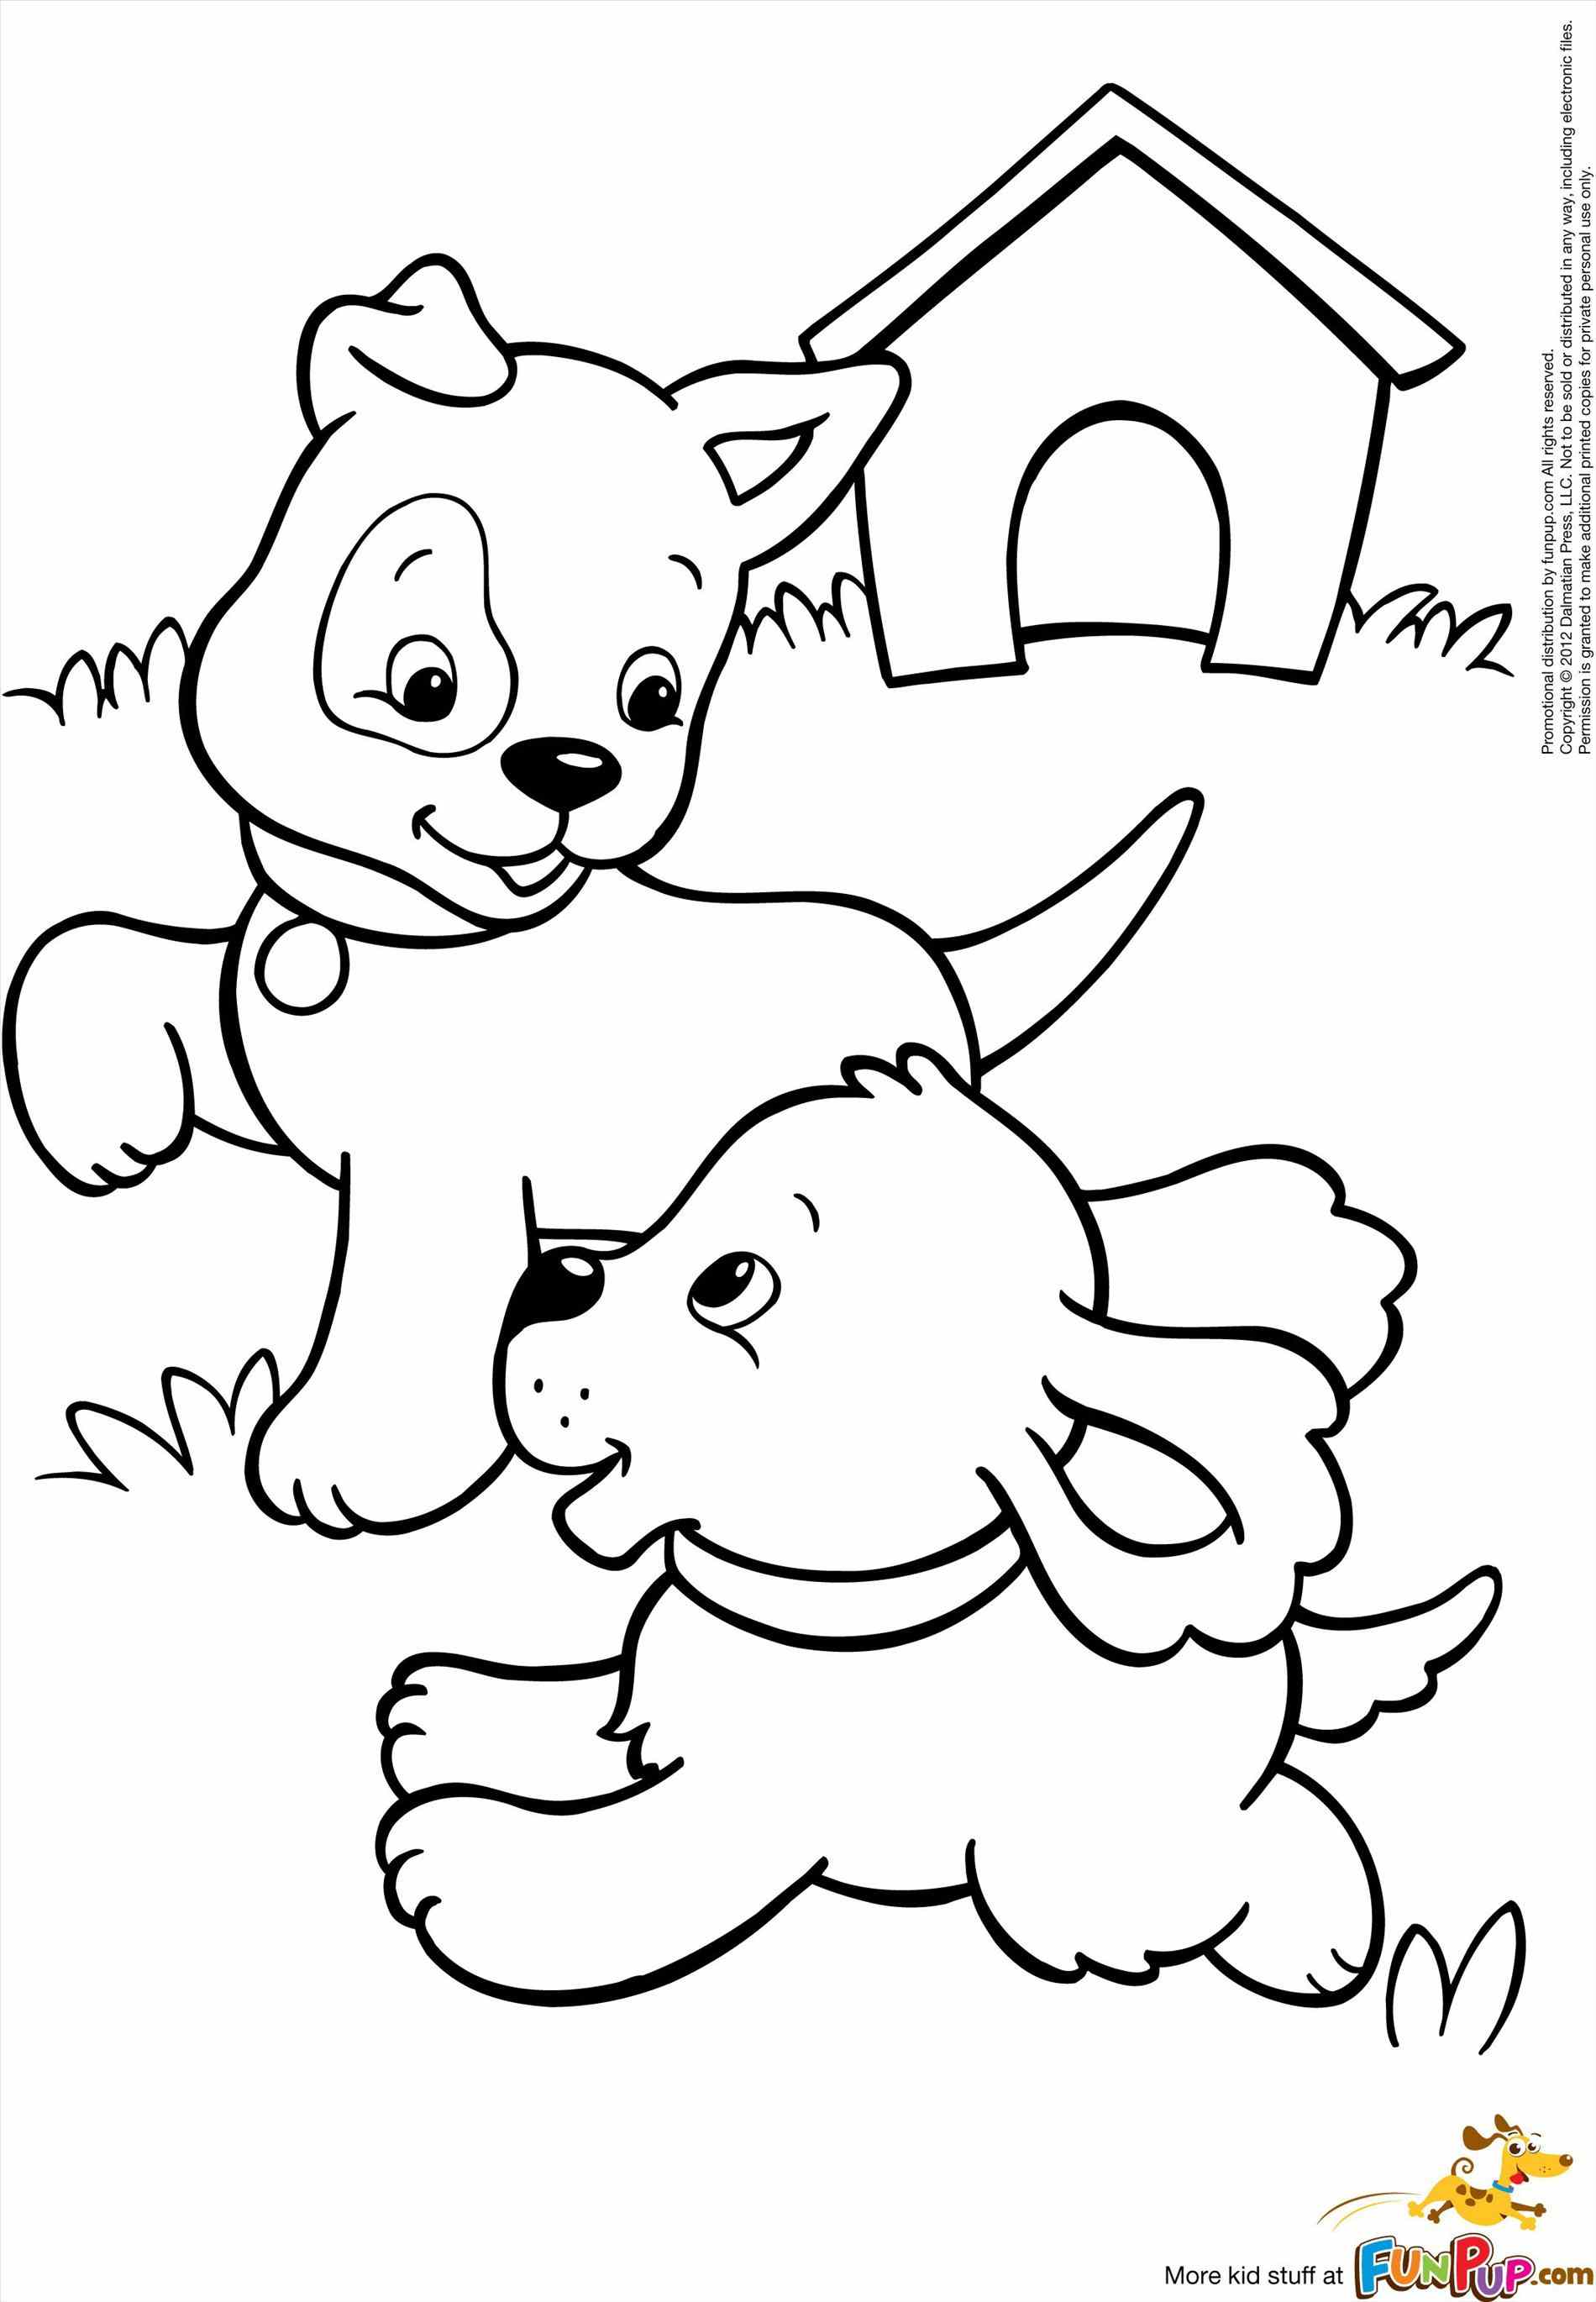 Puppy And Kitten Coloring Pages To Print at GetColorings